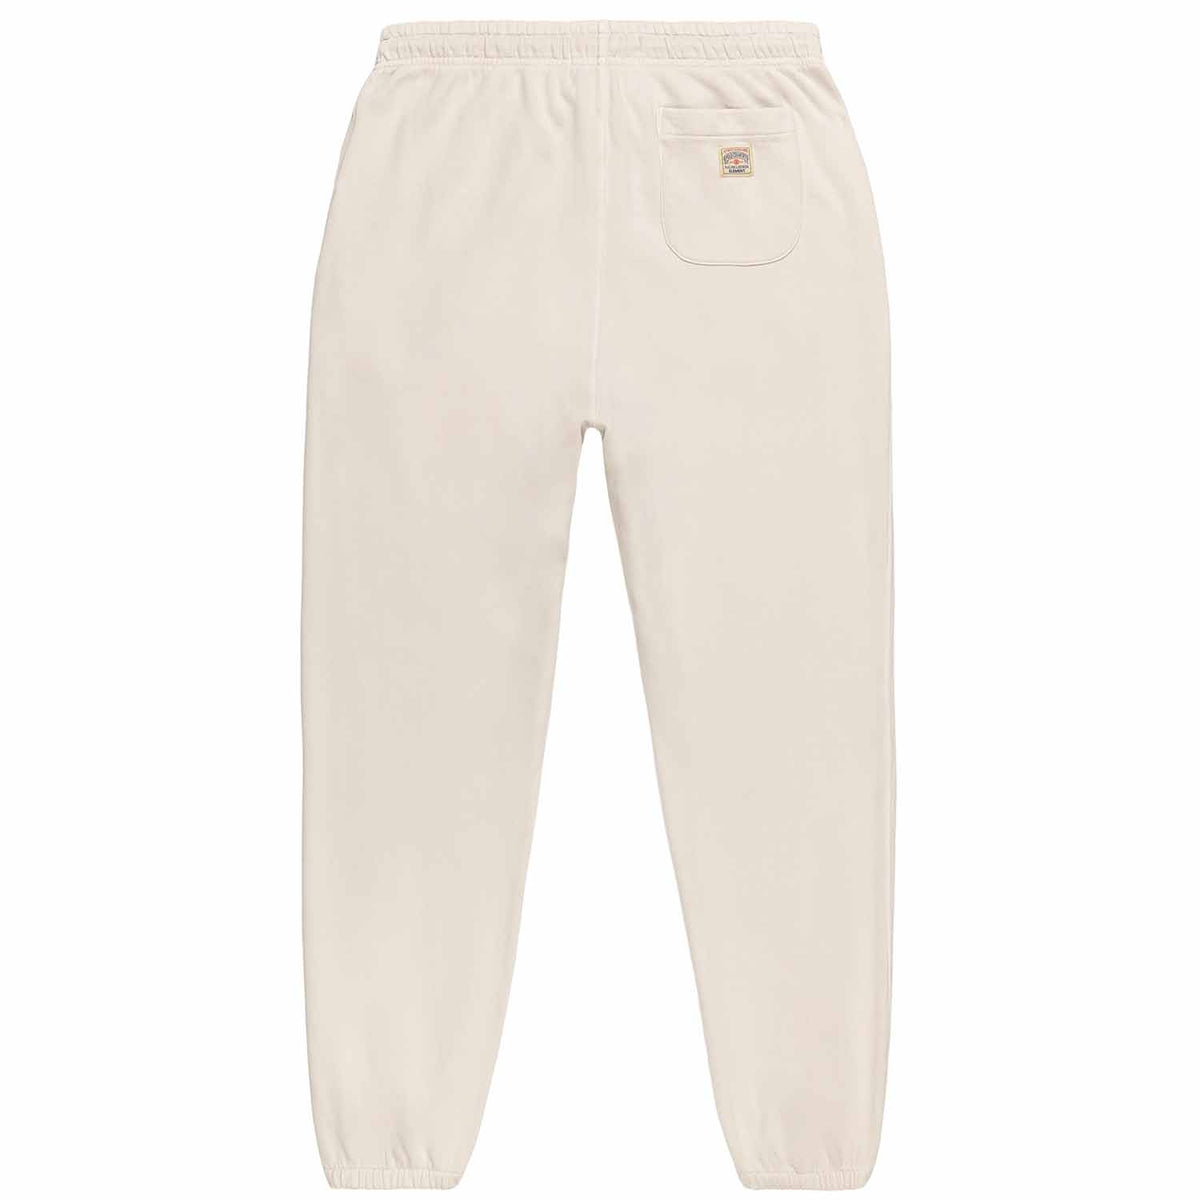 Polo Ralph Lauren x Element Sweatpants in cream with draw string and elastic in ankles. With back pocket on right side and small patch Polo Ralph Lauren x Element logo on pocket.